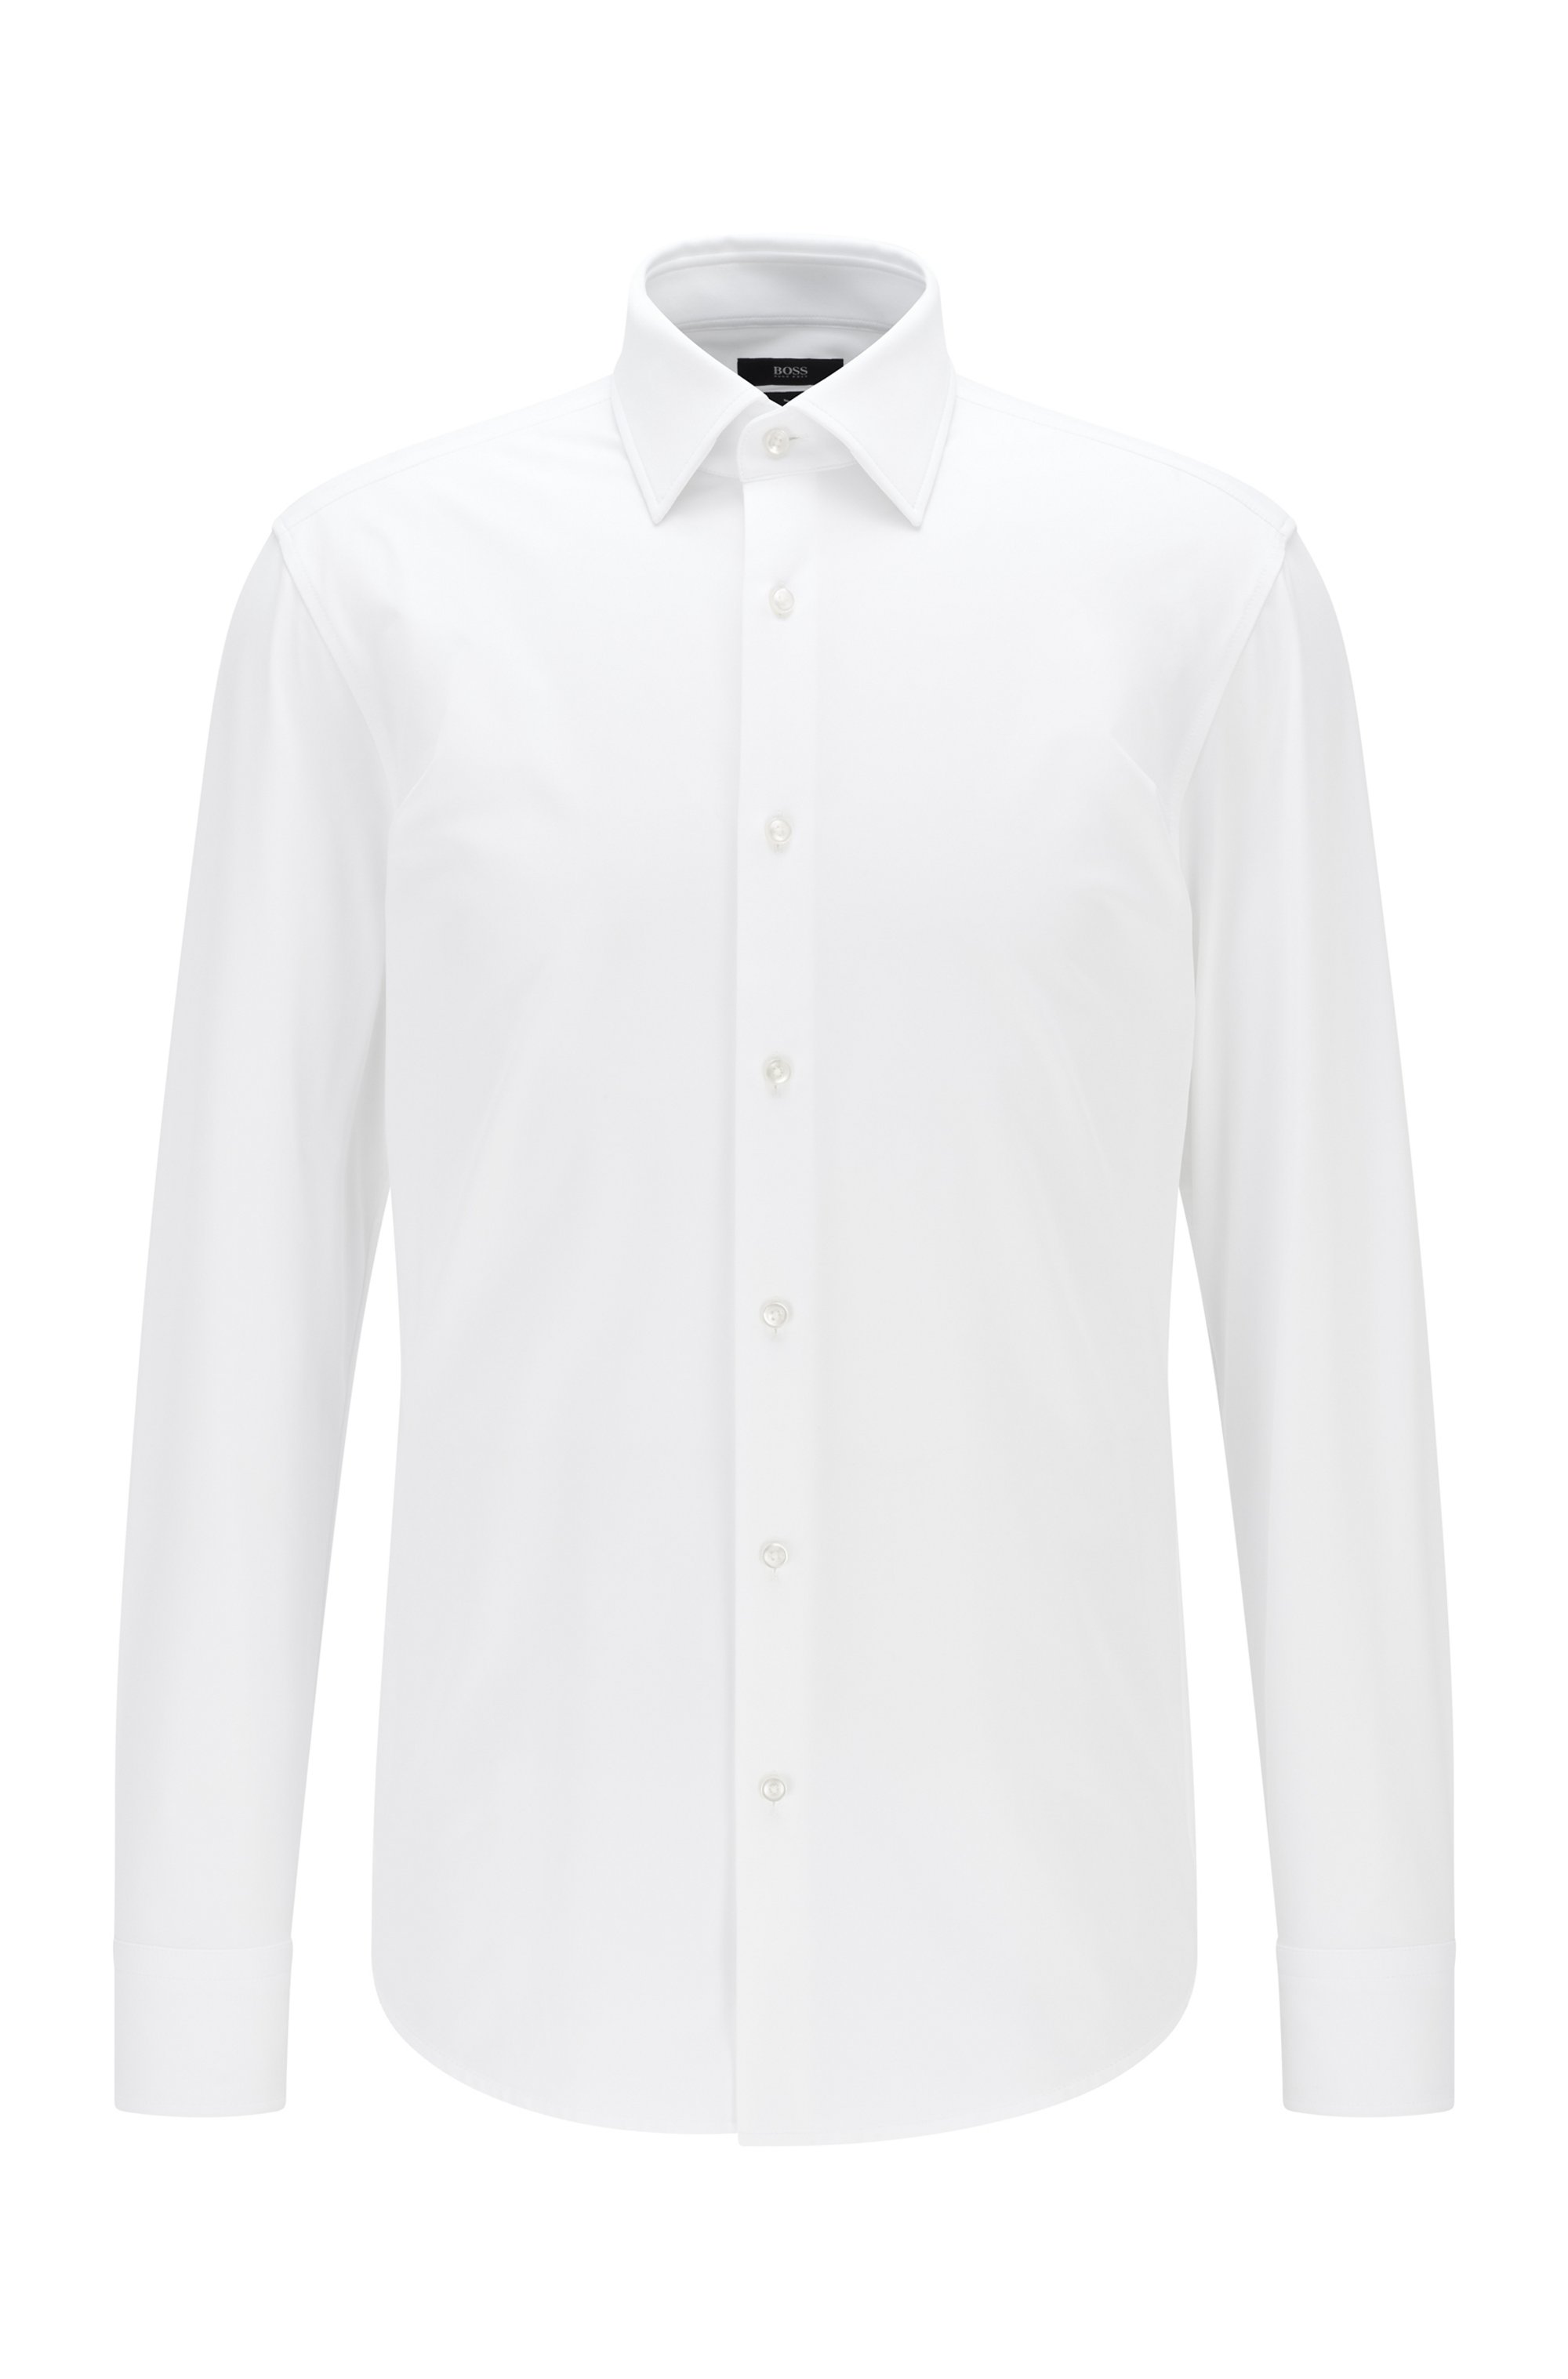 Slim-fit shirt in Italian performance-stretch jersey, White